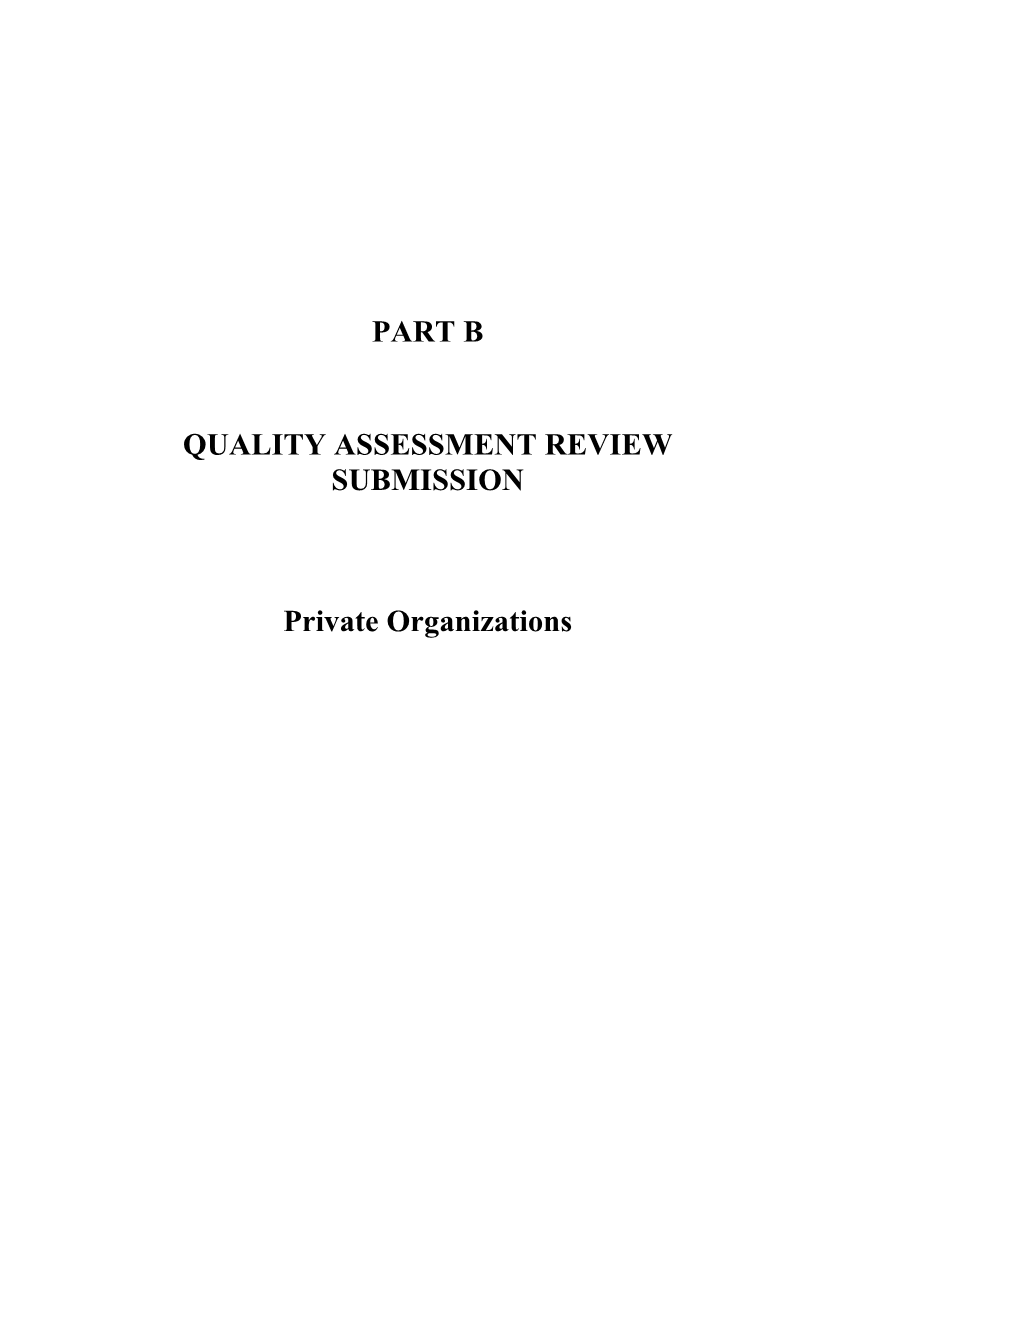 PART B QUALITY ASSESSMENT REVIEW SUBMISSION Private